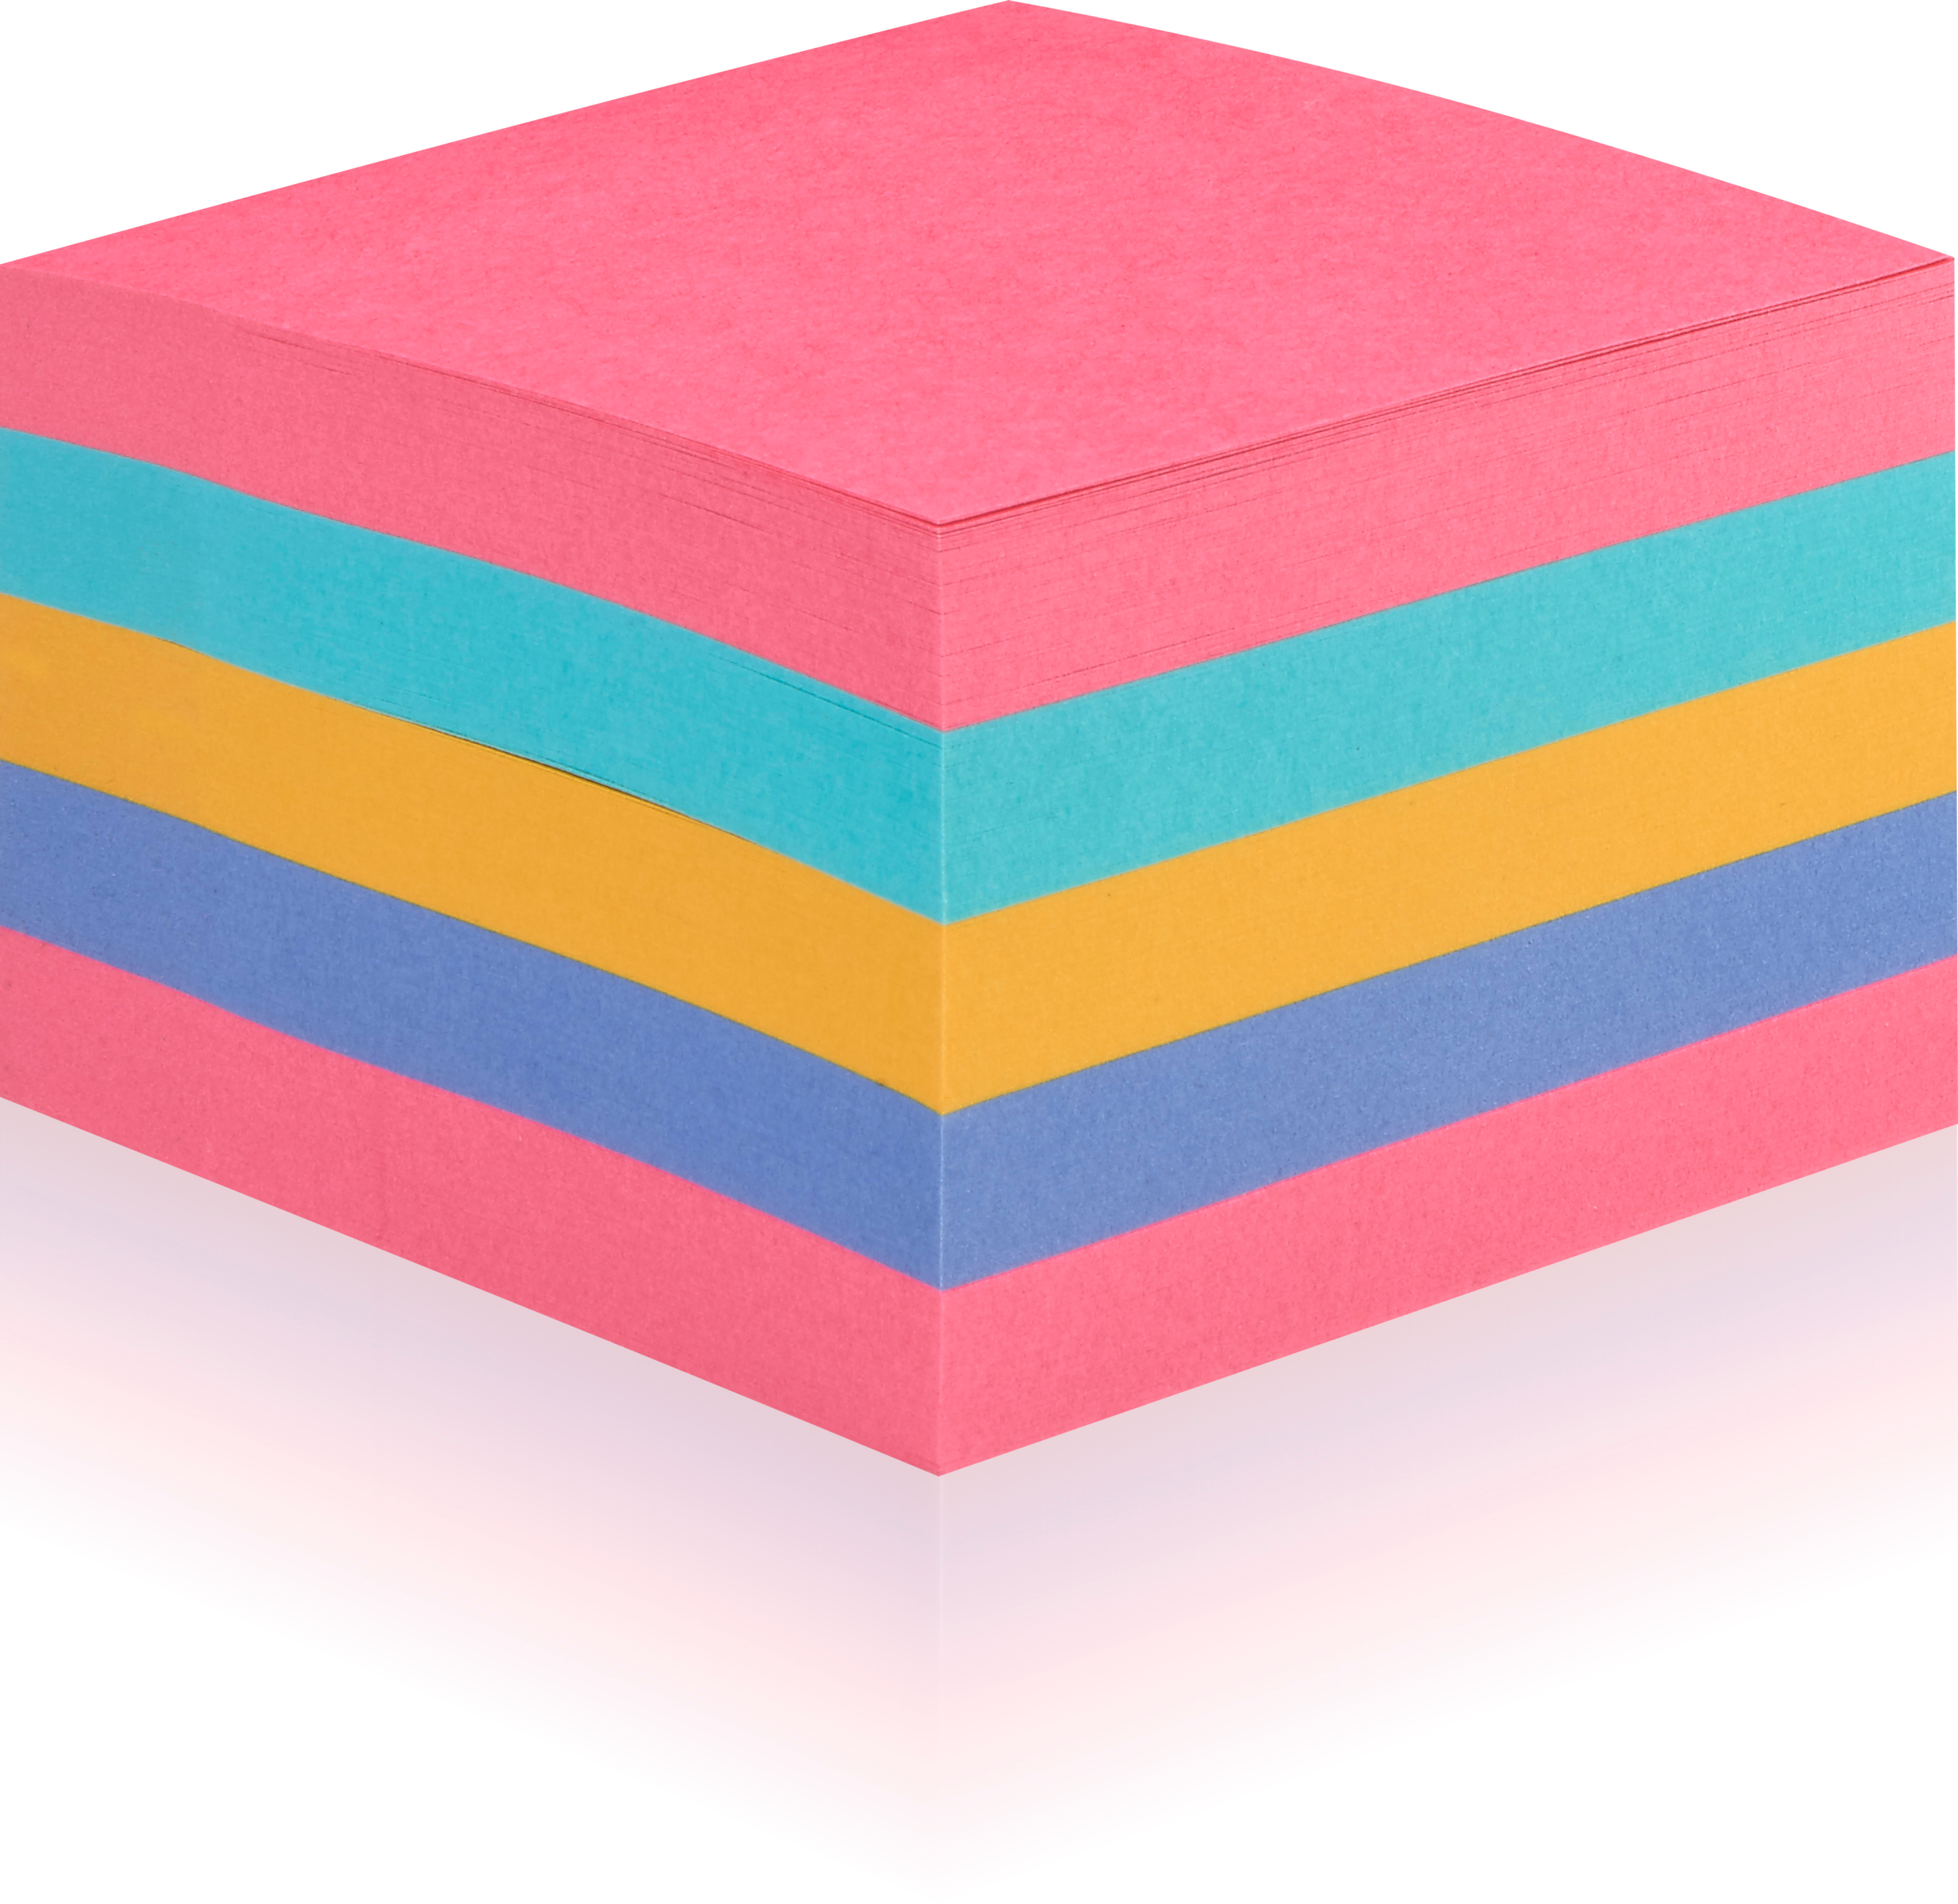 POST-IT Cube Super Sticky 76x76mm 2028SSRBWC multicolor 440 feuilles